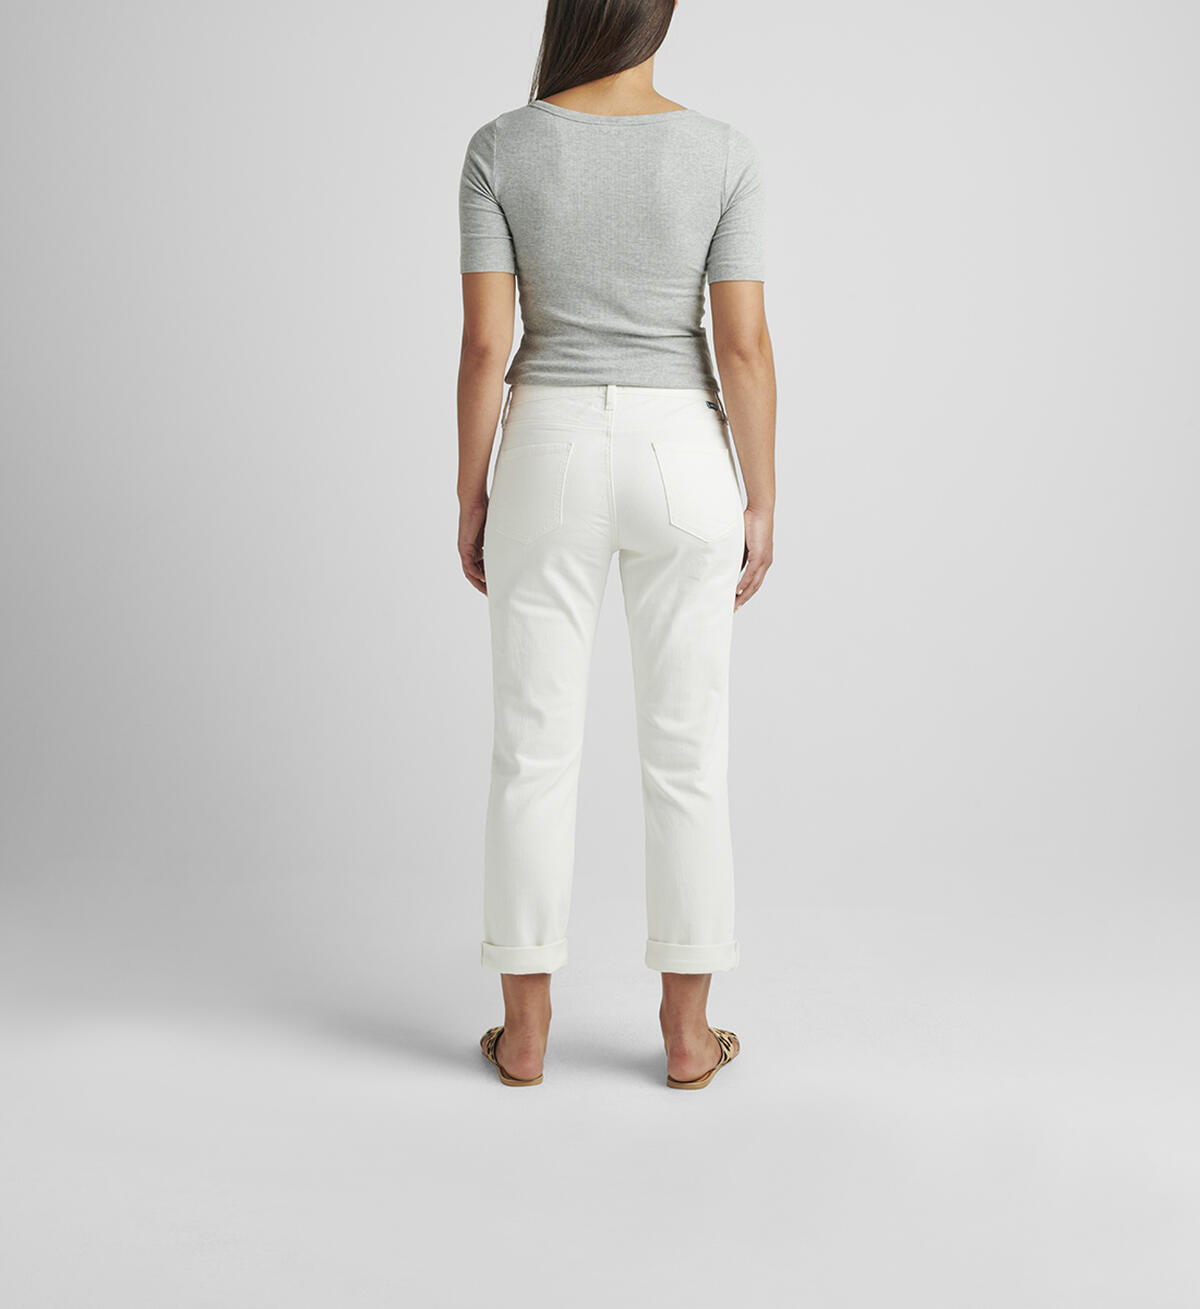 Carter Mid Rise Girlfriend Jeans, White, hi-res image number 1